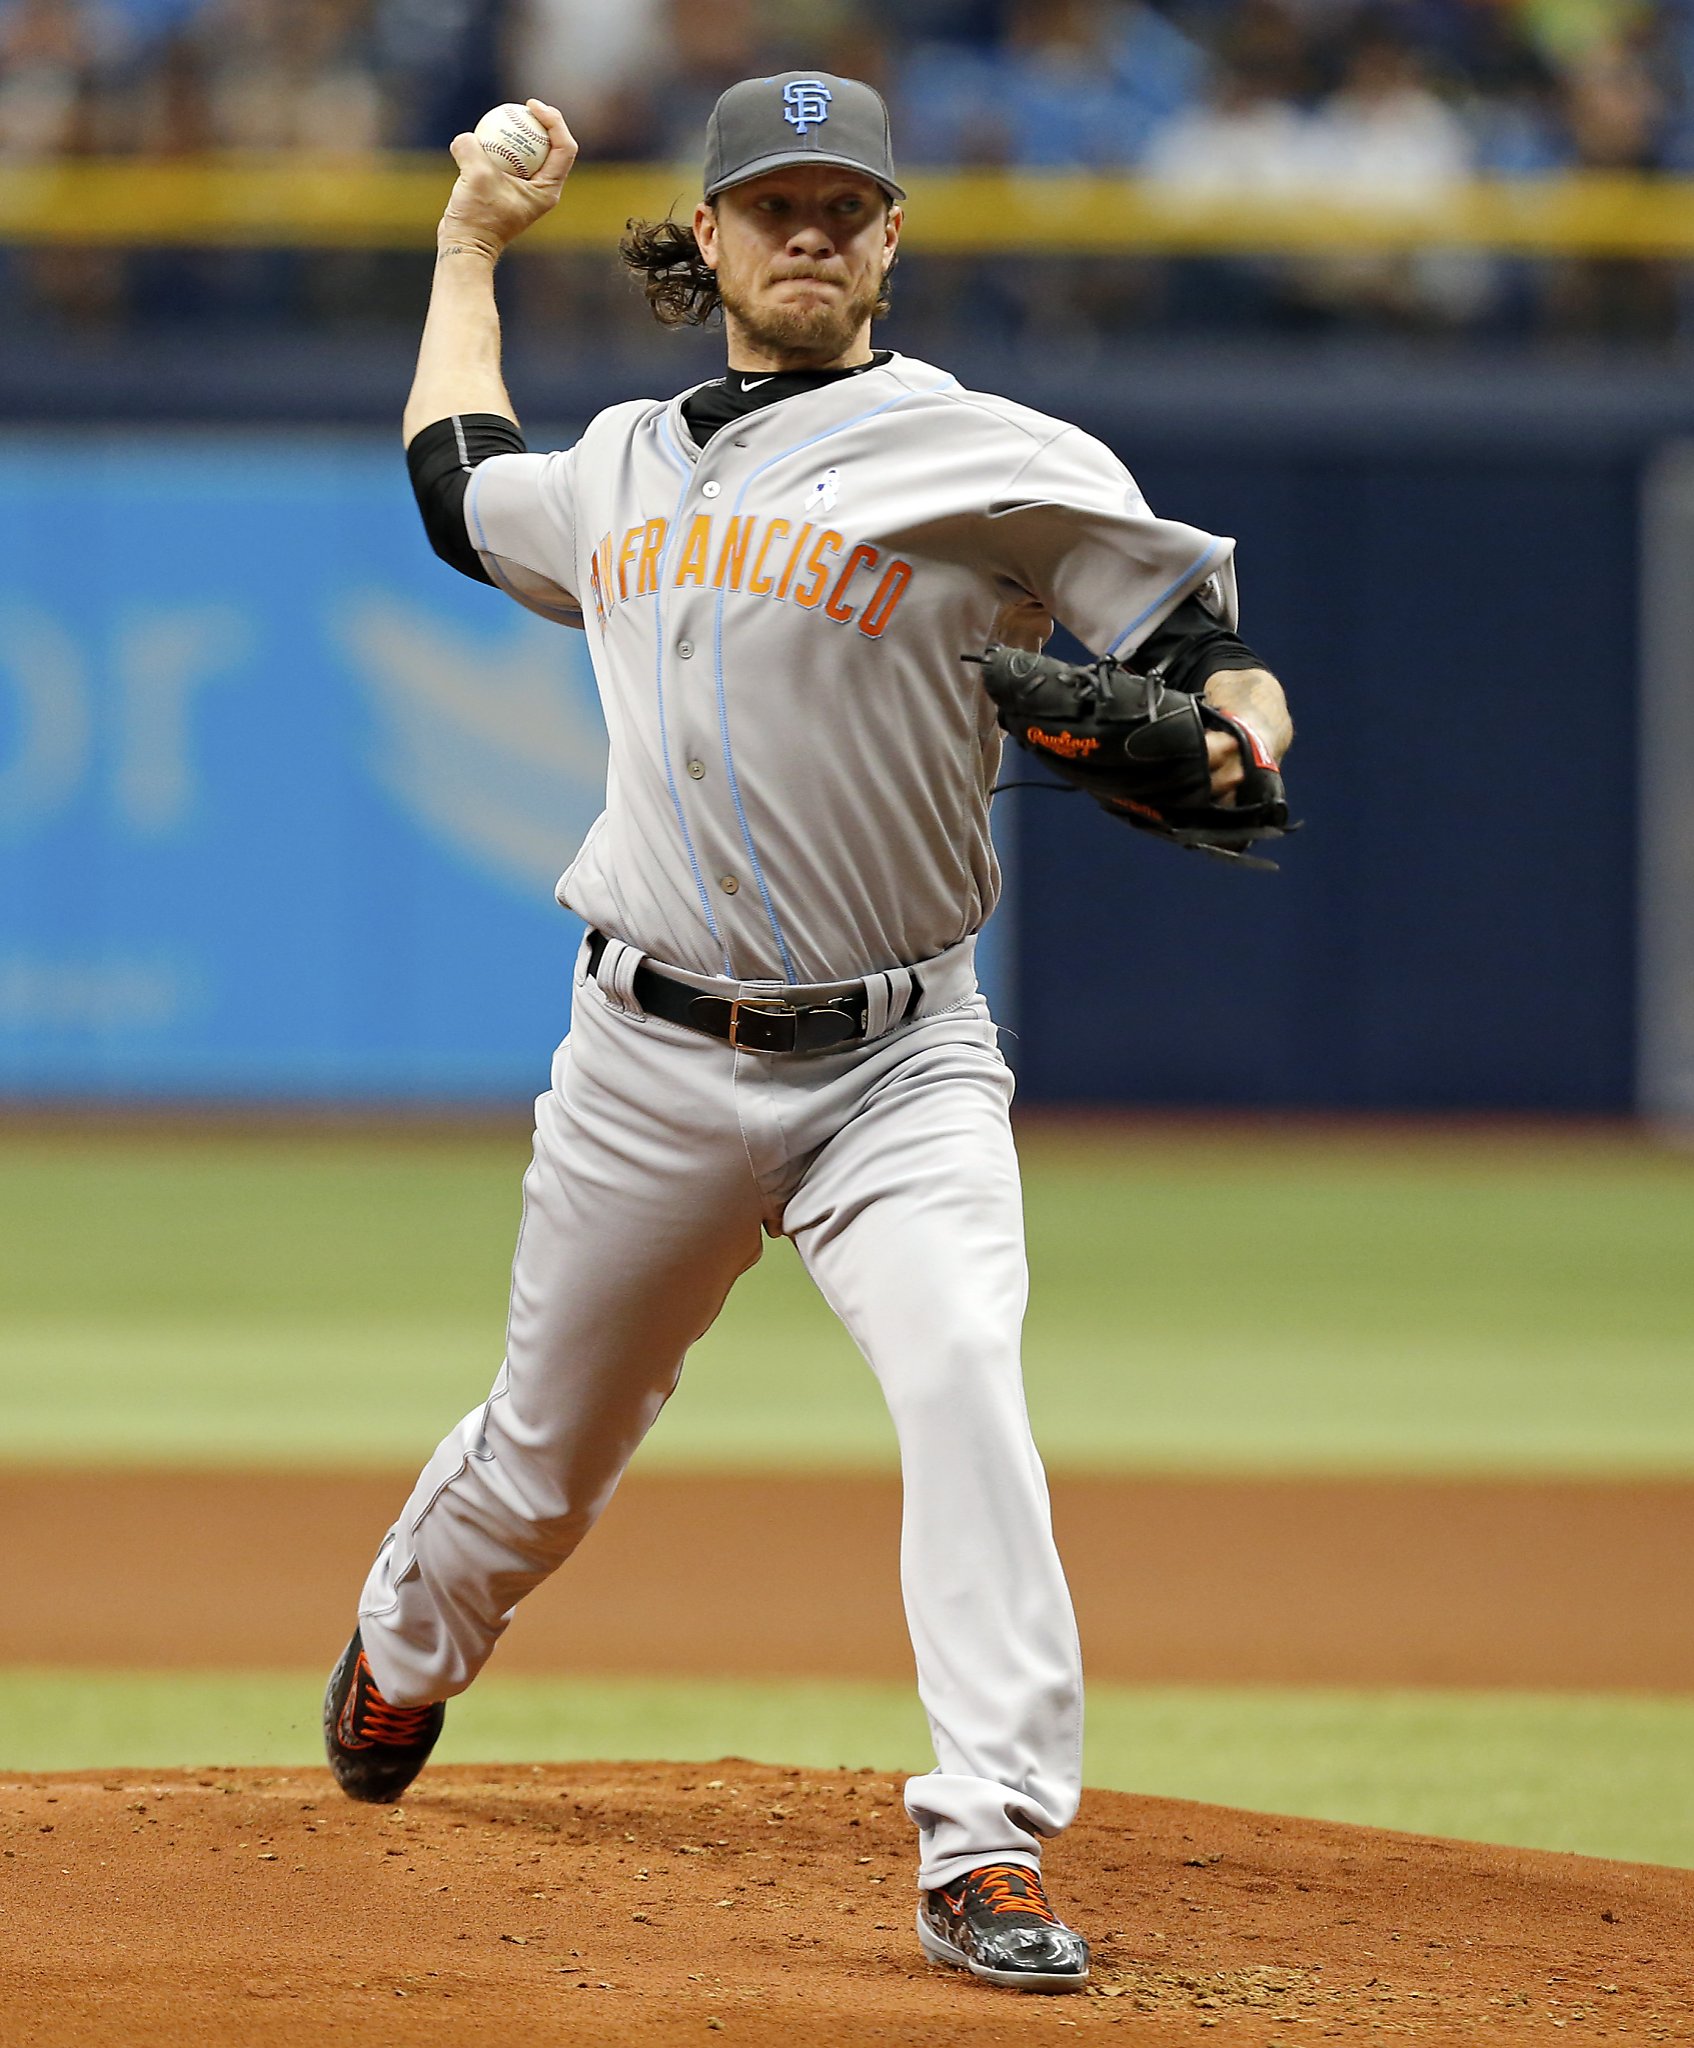 Giants' Jake Peavy defrauded of millions in investment scheme